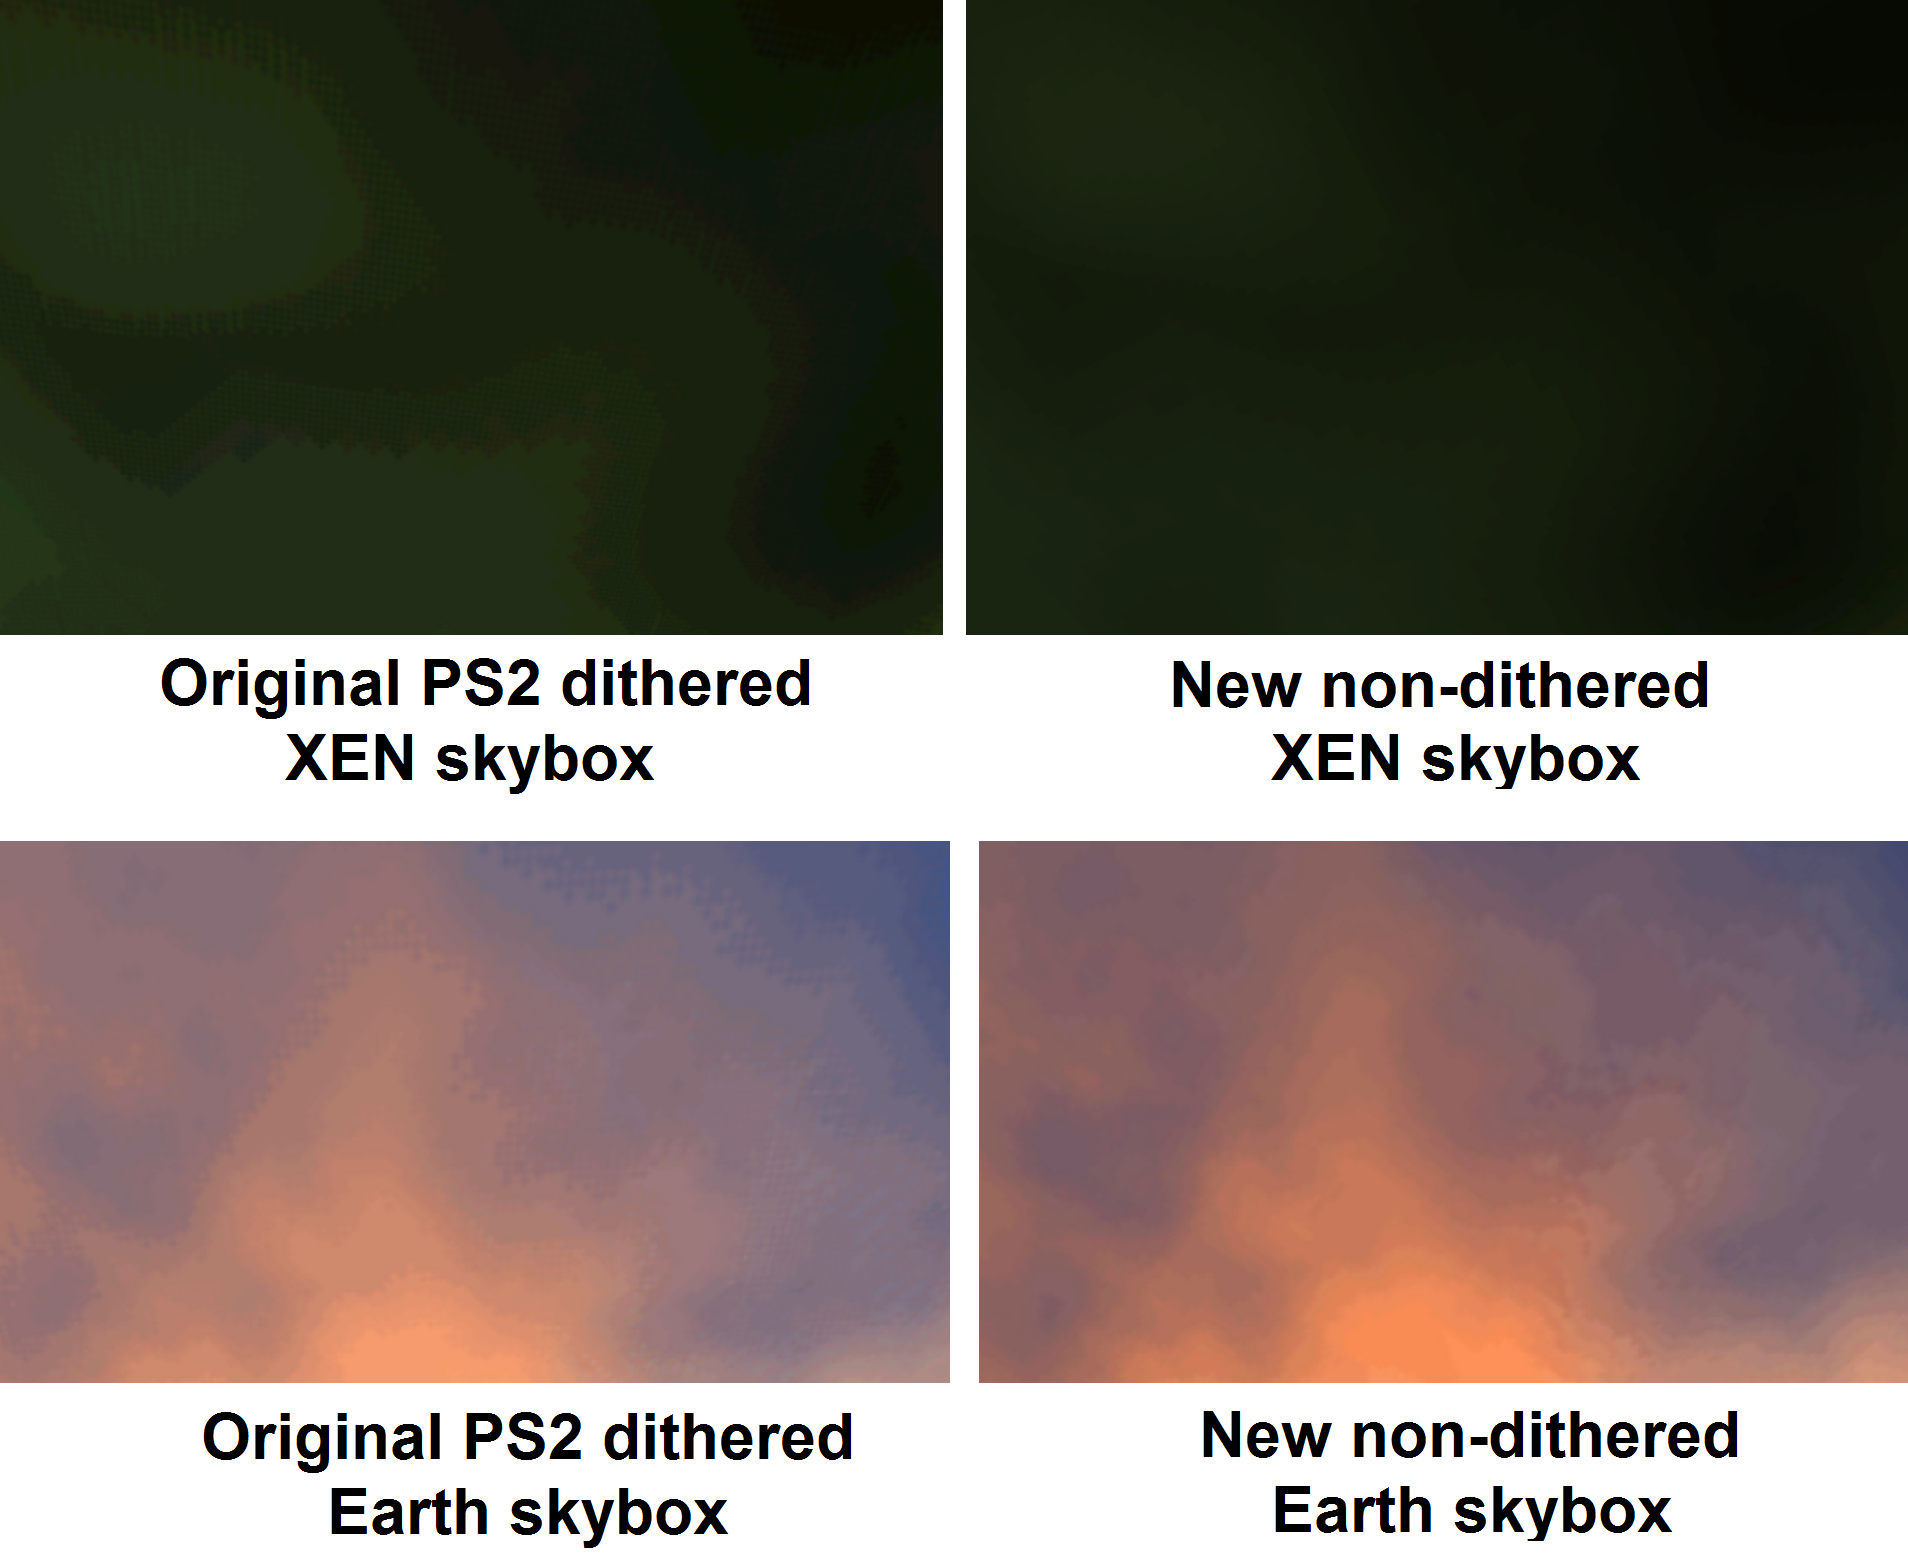 Comparison of dithered and non-dithered skebox textures.